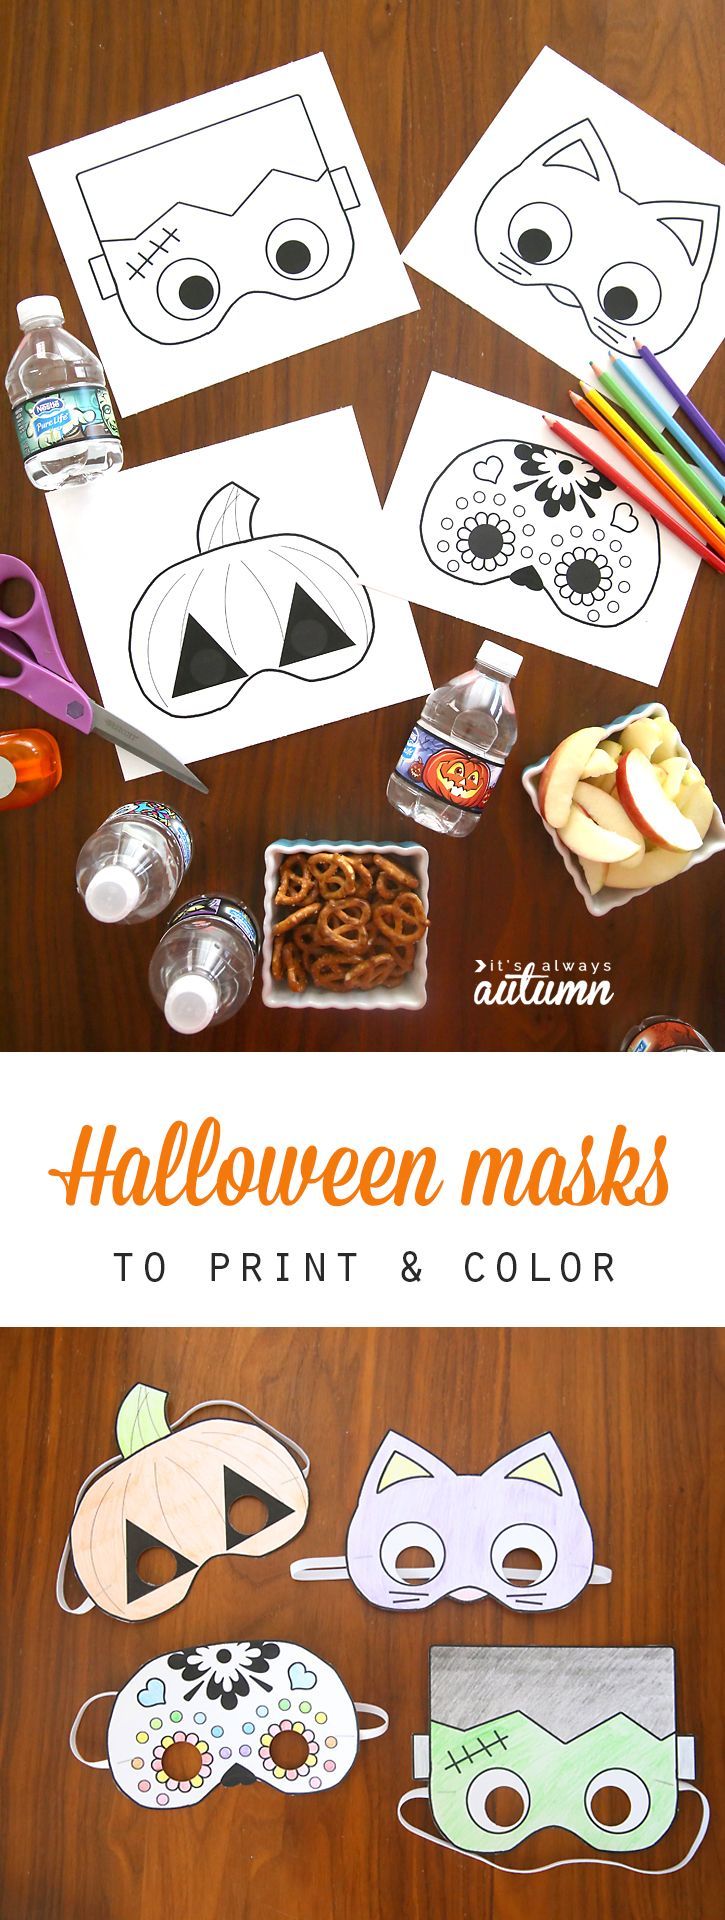 Halloween masks to print and color -   25 halloween crafts for school
 ideas